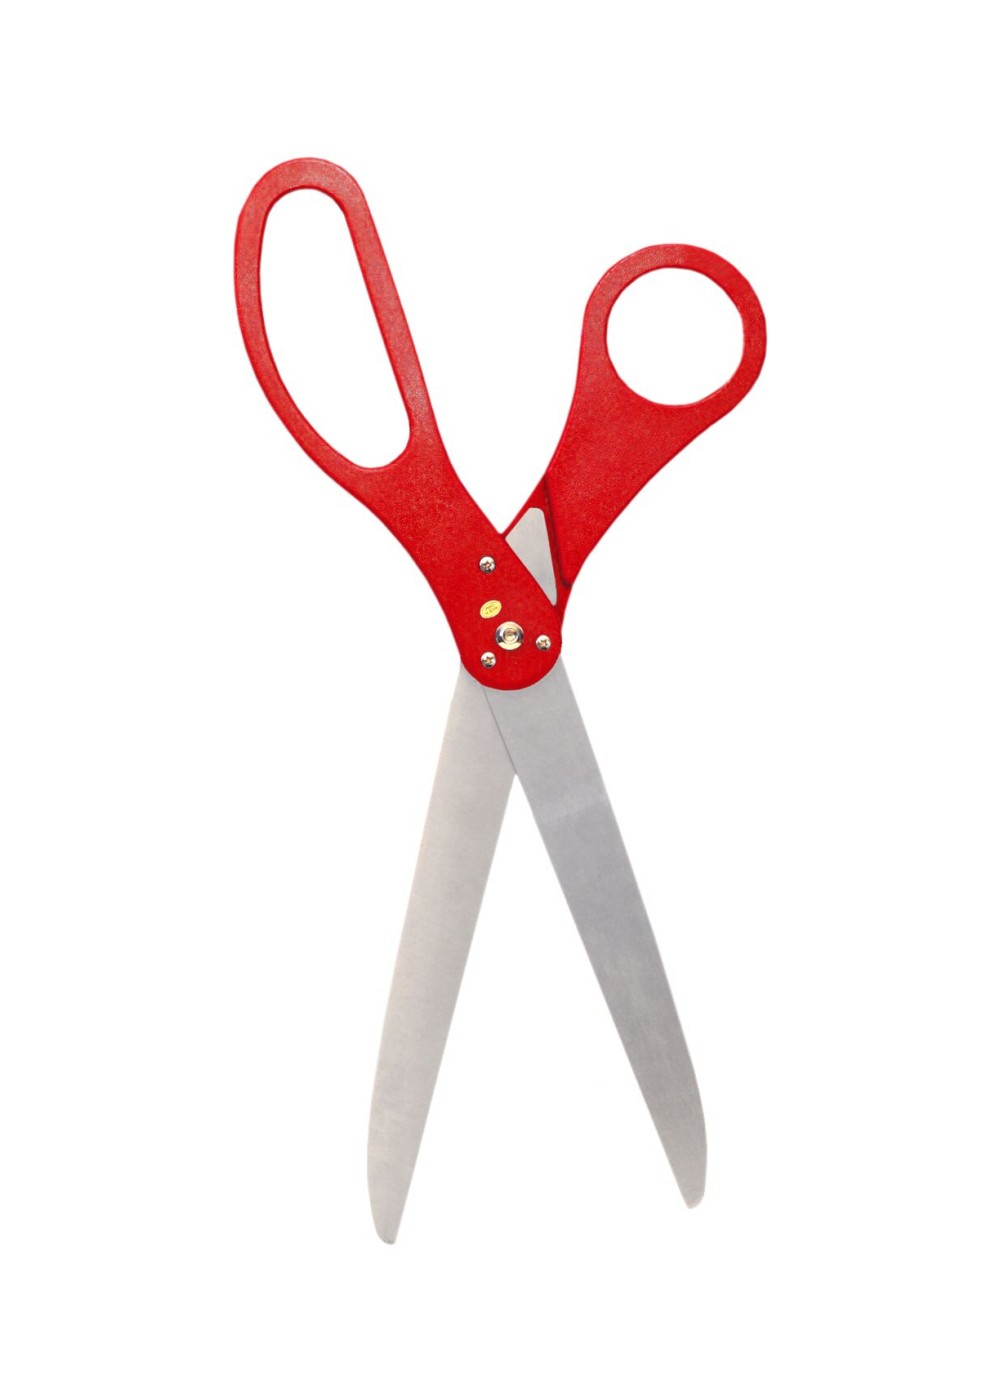  Giant Ceremonial Ribbon Cutting Scissors Red